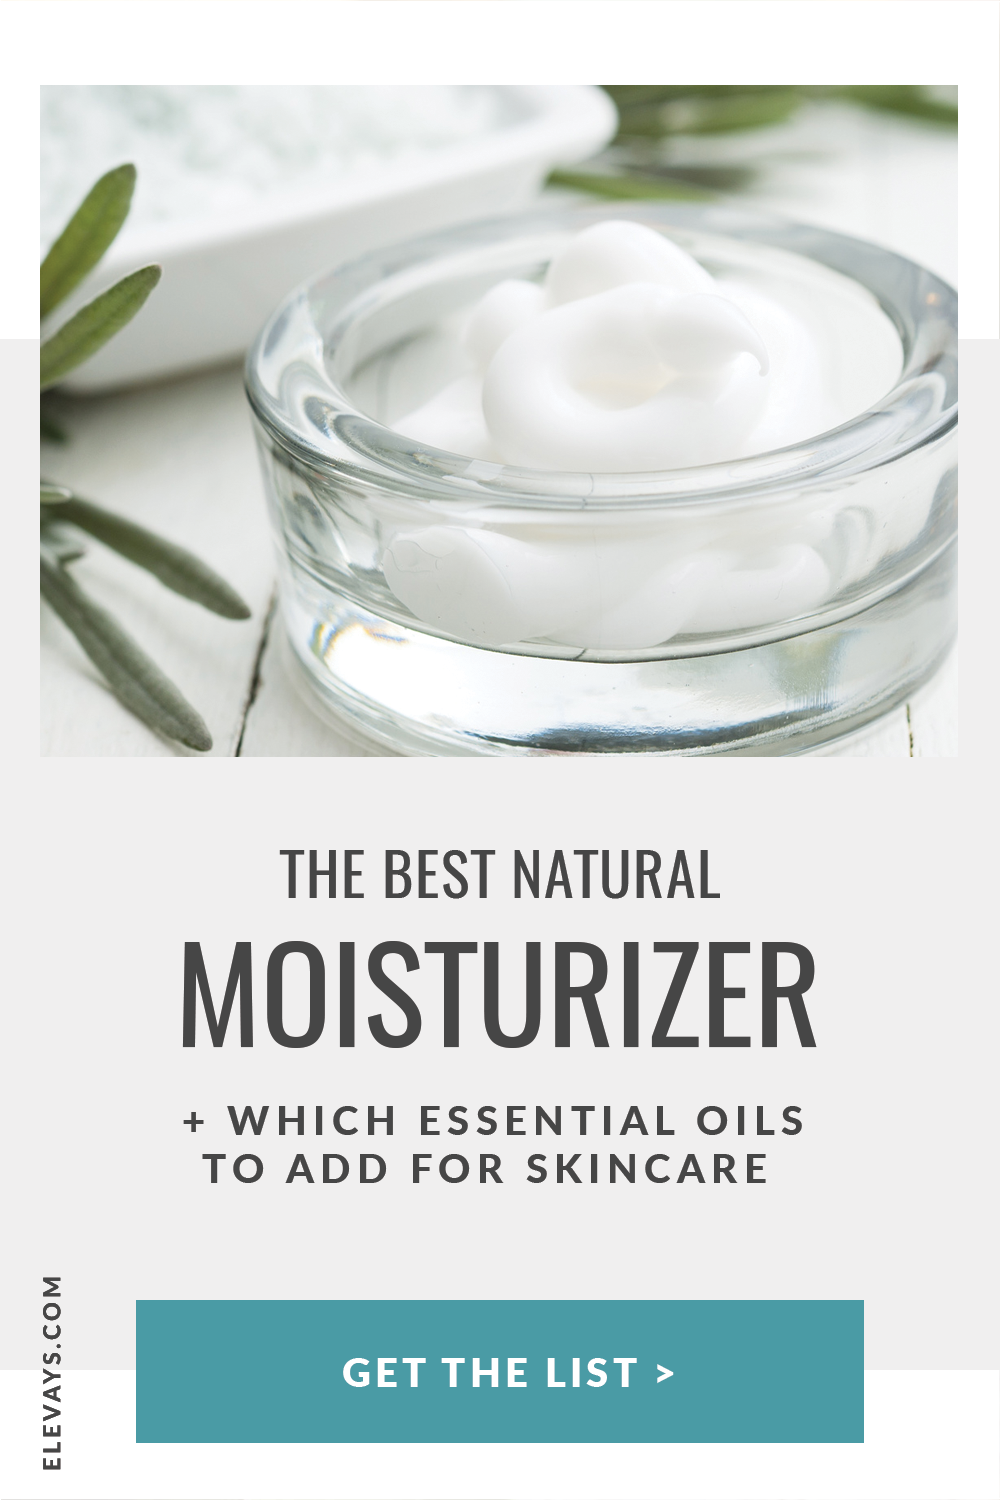 The Best Natural Moisturizer for Hydrated Skin + The Best Essential Oils for Skincare